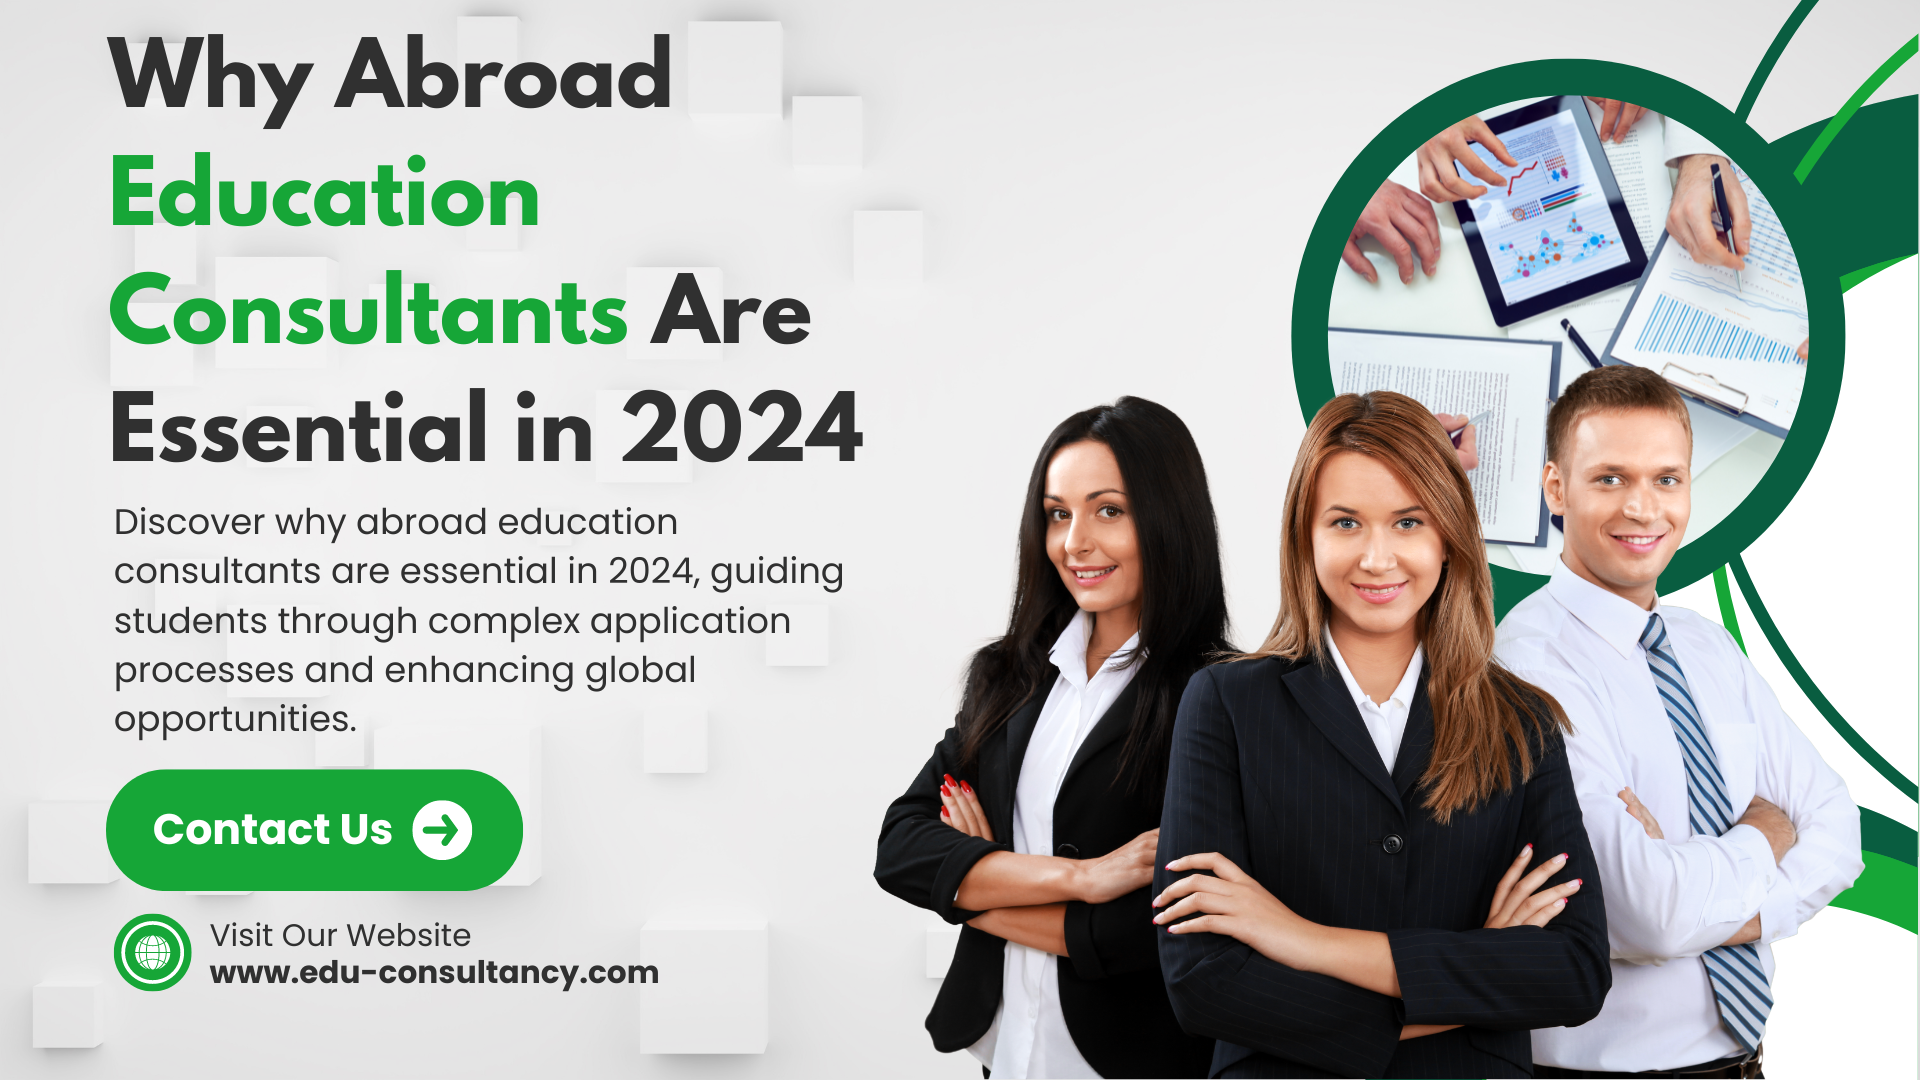 Why Abroad Education Consultants Are Essential in 2024